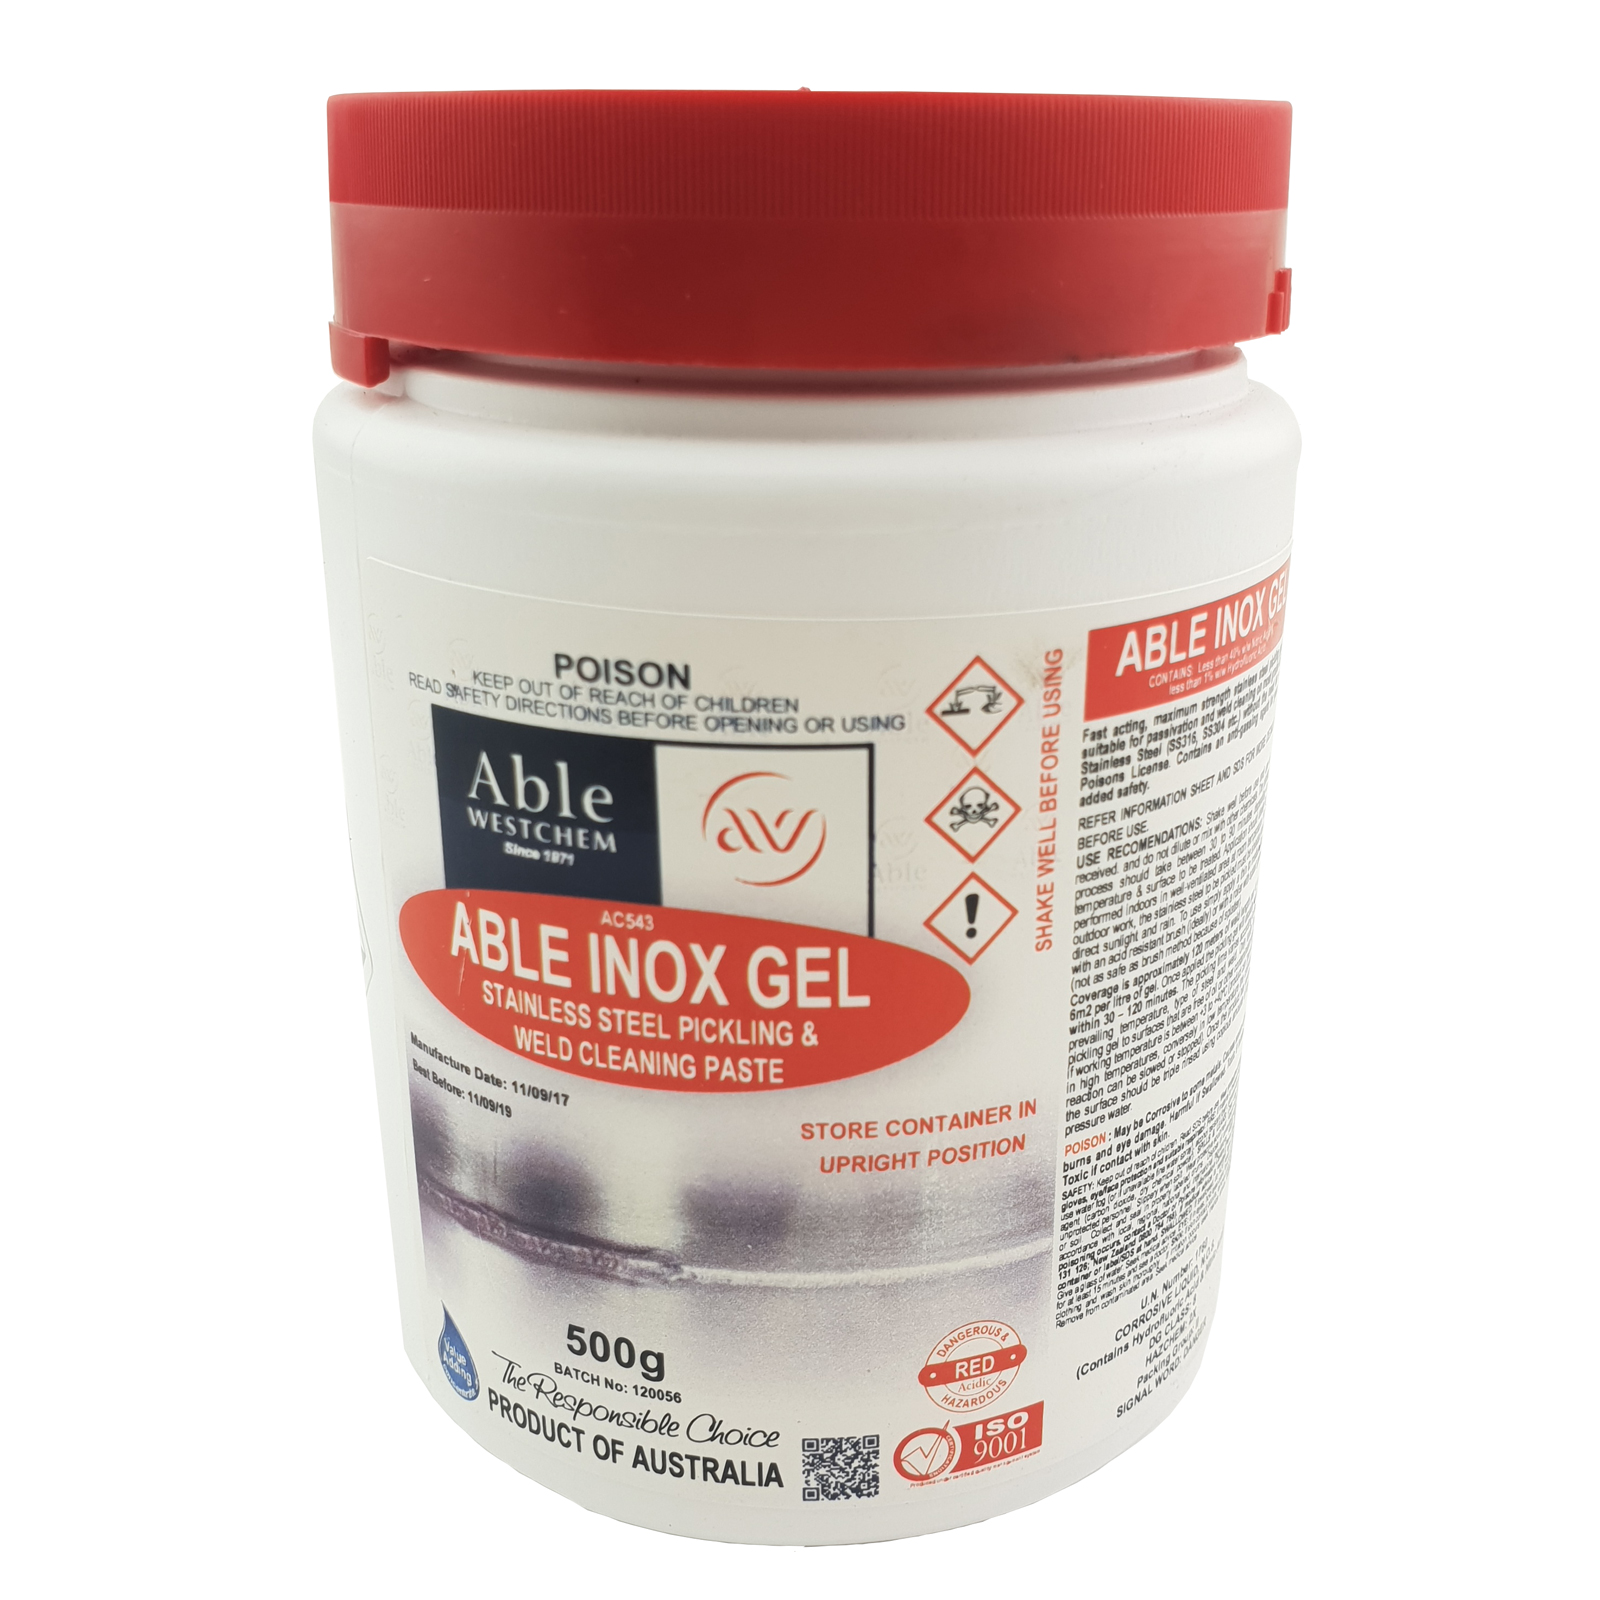 Able Inox Stainless Steel Pickling Cleaning Paste - 500g